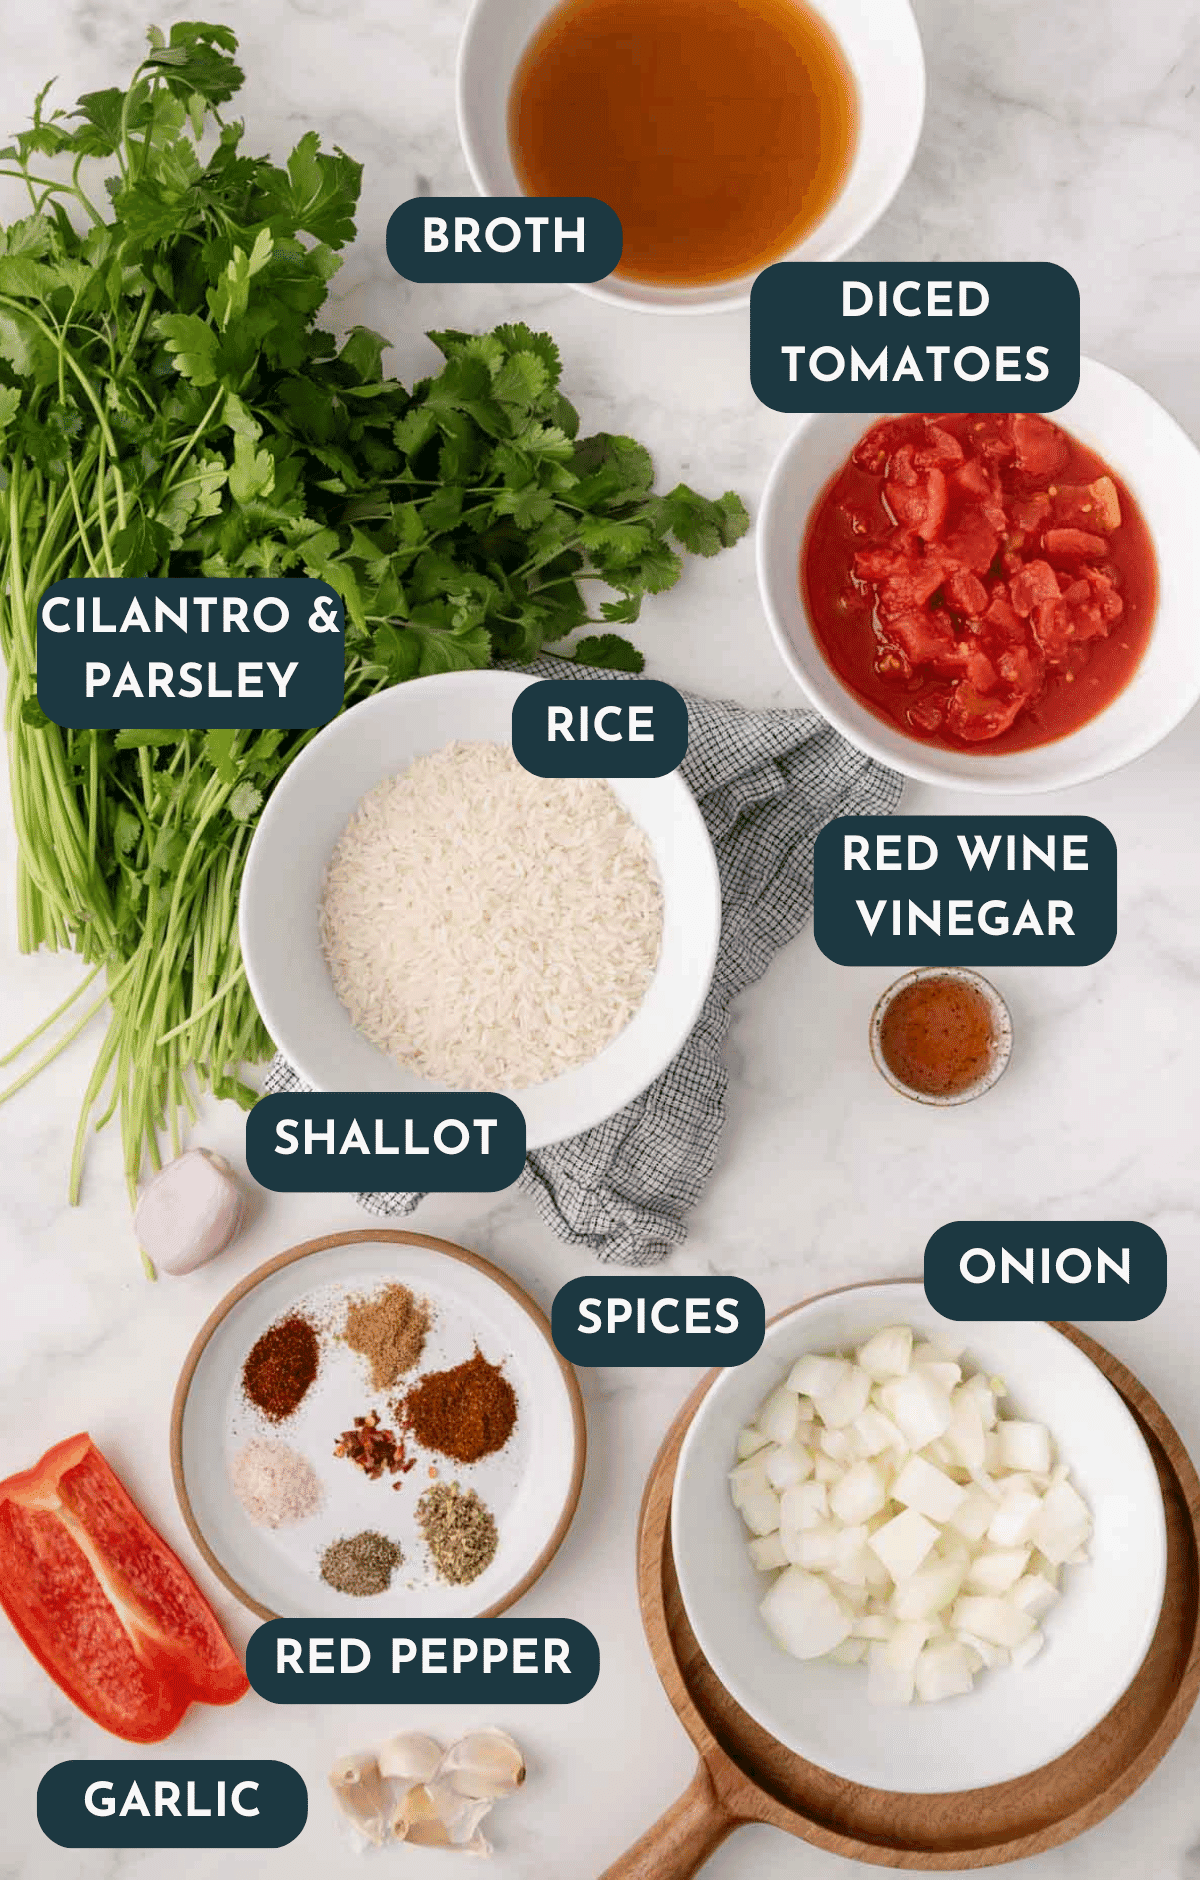 rice, herbs and other ingredients laid out and labeled with text on top